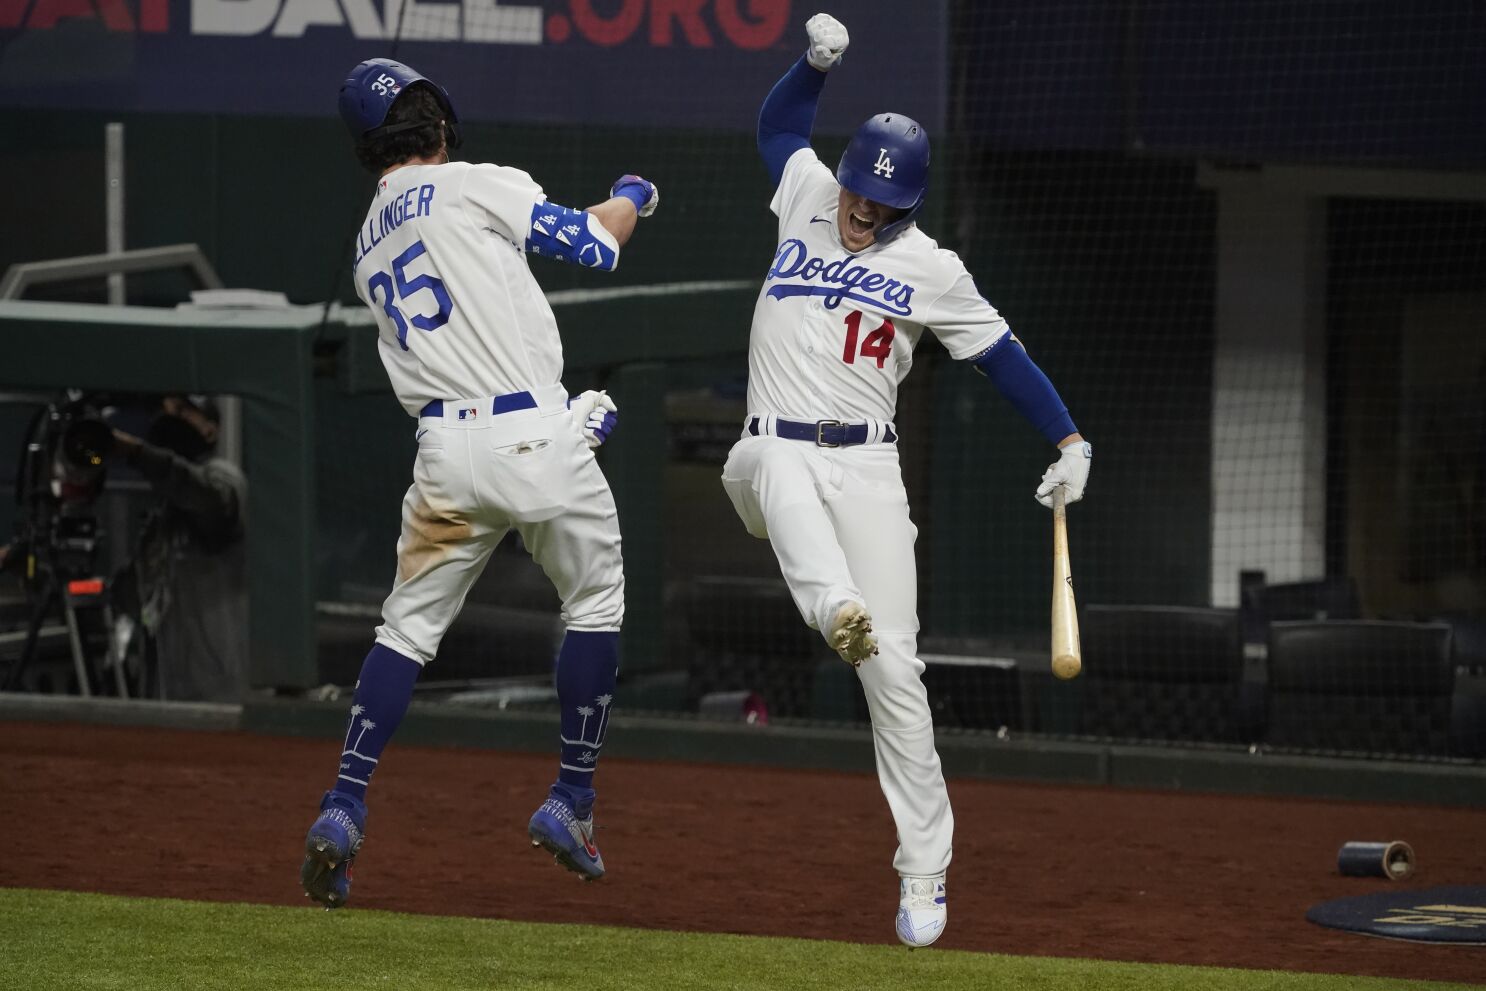 Corey Seager's mom has connection to Dodger